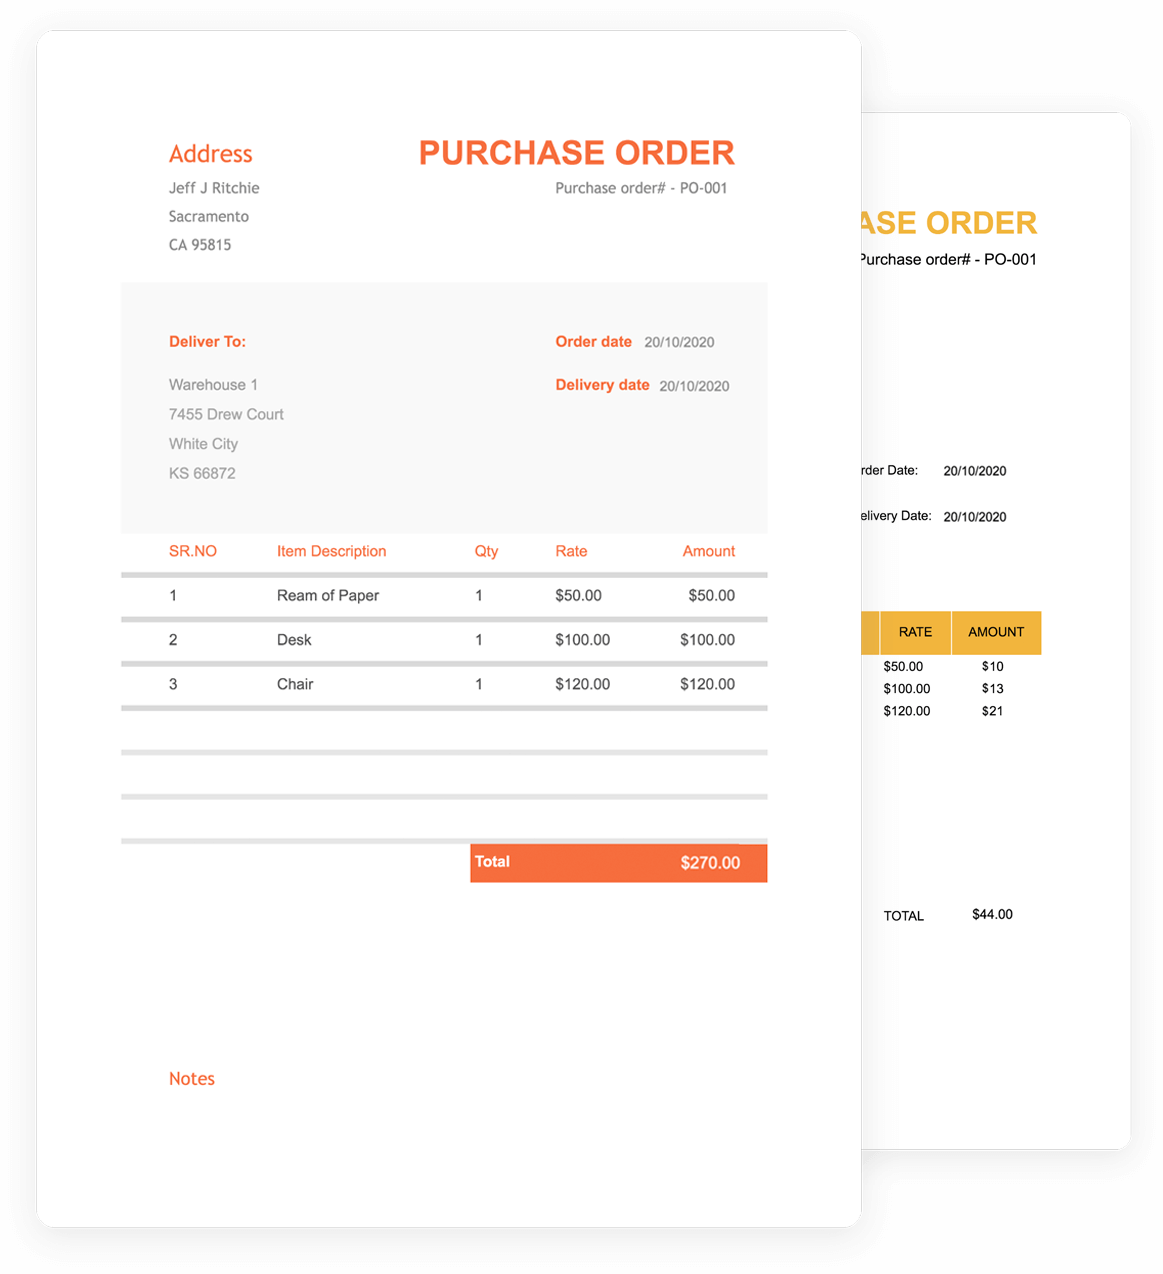 https://www.zoho.com/inventory/purchase-order-templates/images/purchase-order-2x.png